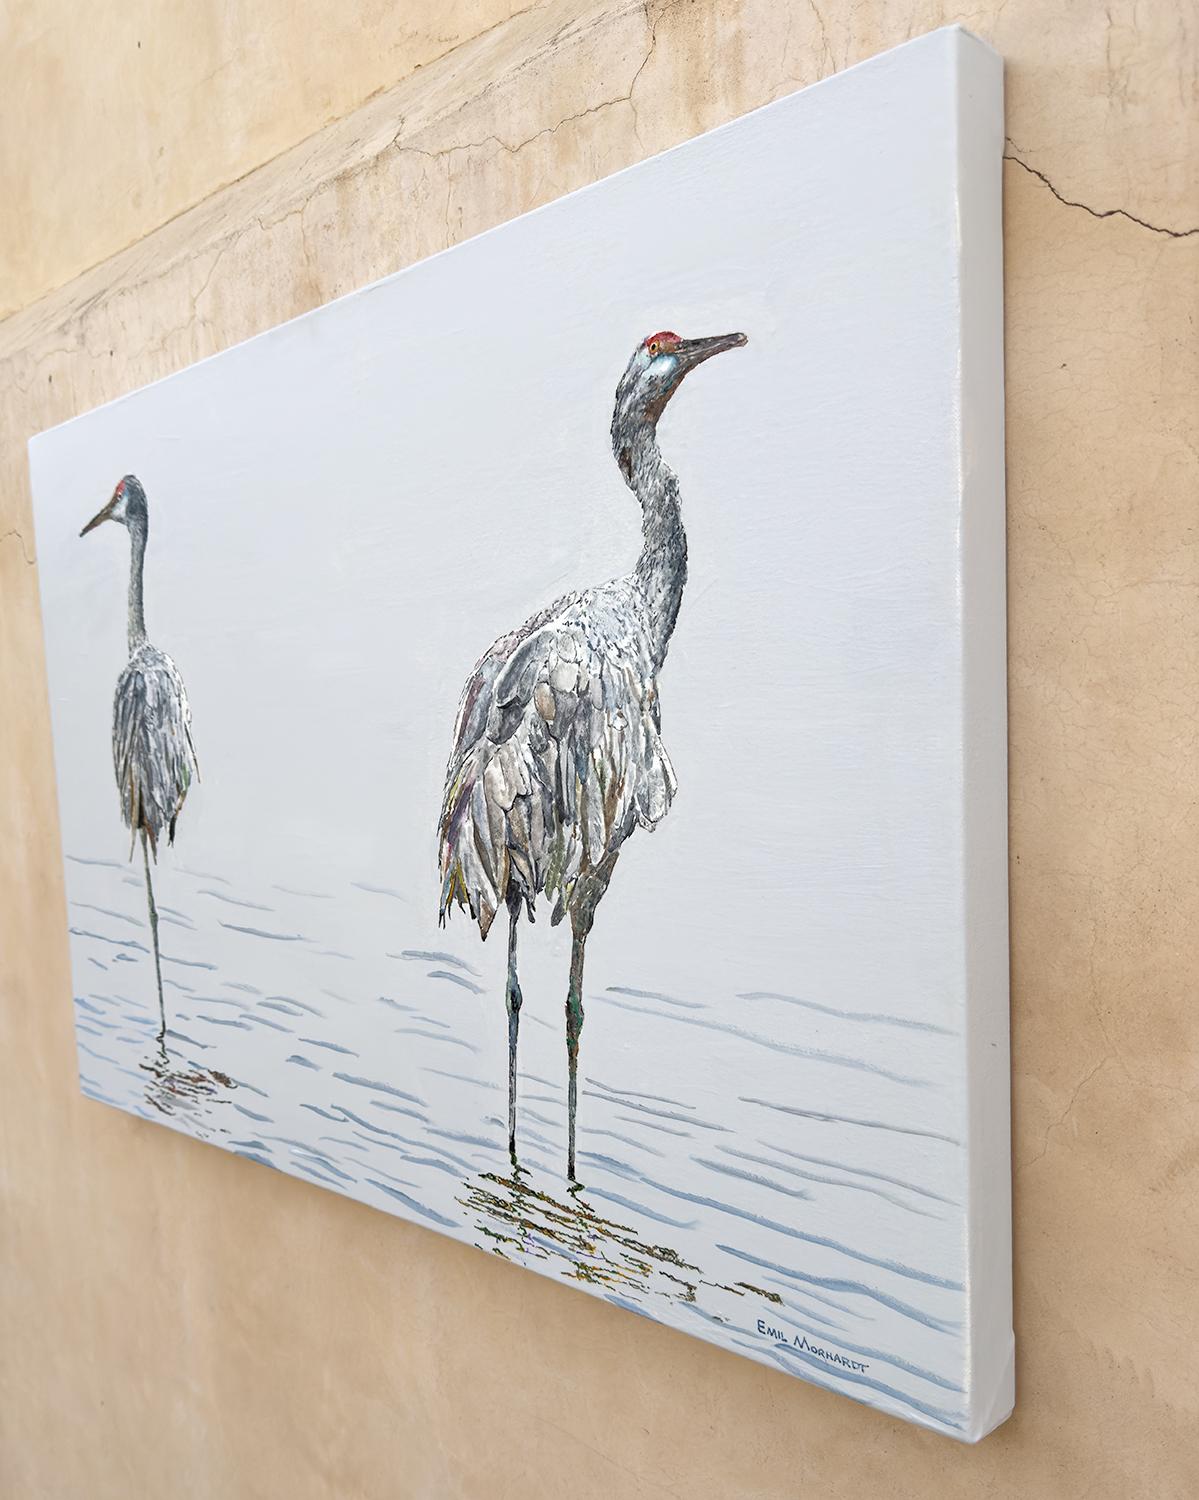 <p>Artist Comments<br>A pair of sandhill cranes stand on opposite sides, their intense eyes seemingly watching each other's backs. Their stoic stance accentuates as the pond they inhabit fades into the grayish rainy mist of California's Central